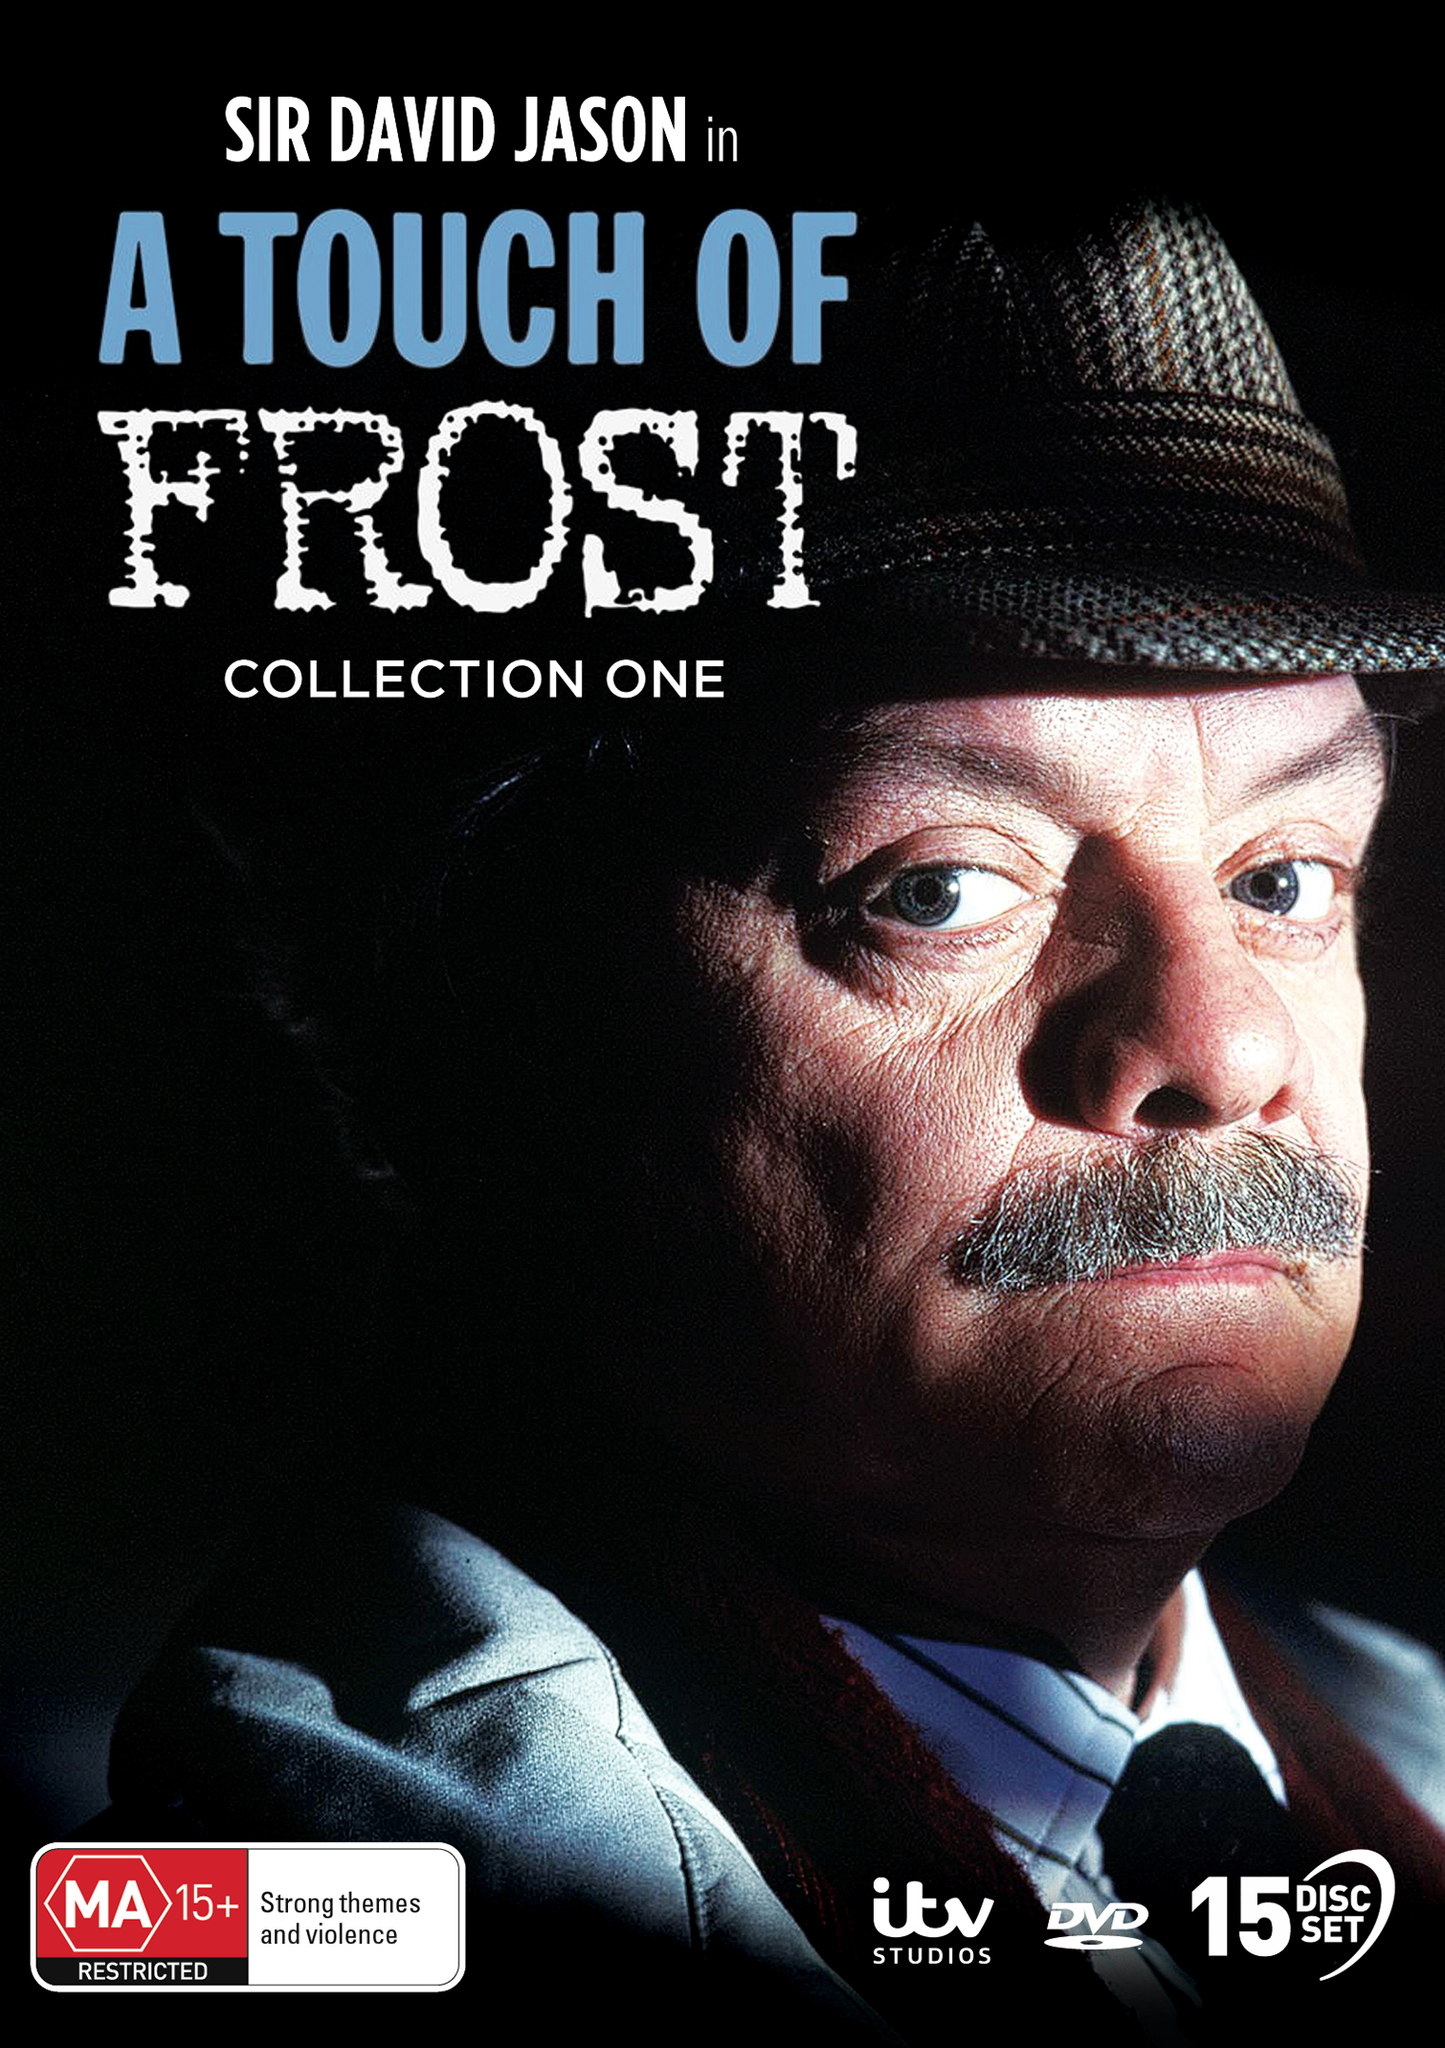 A TOUCH OF FROST: COLLECTION ONE